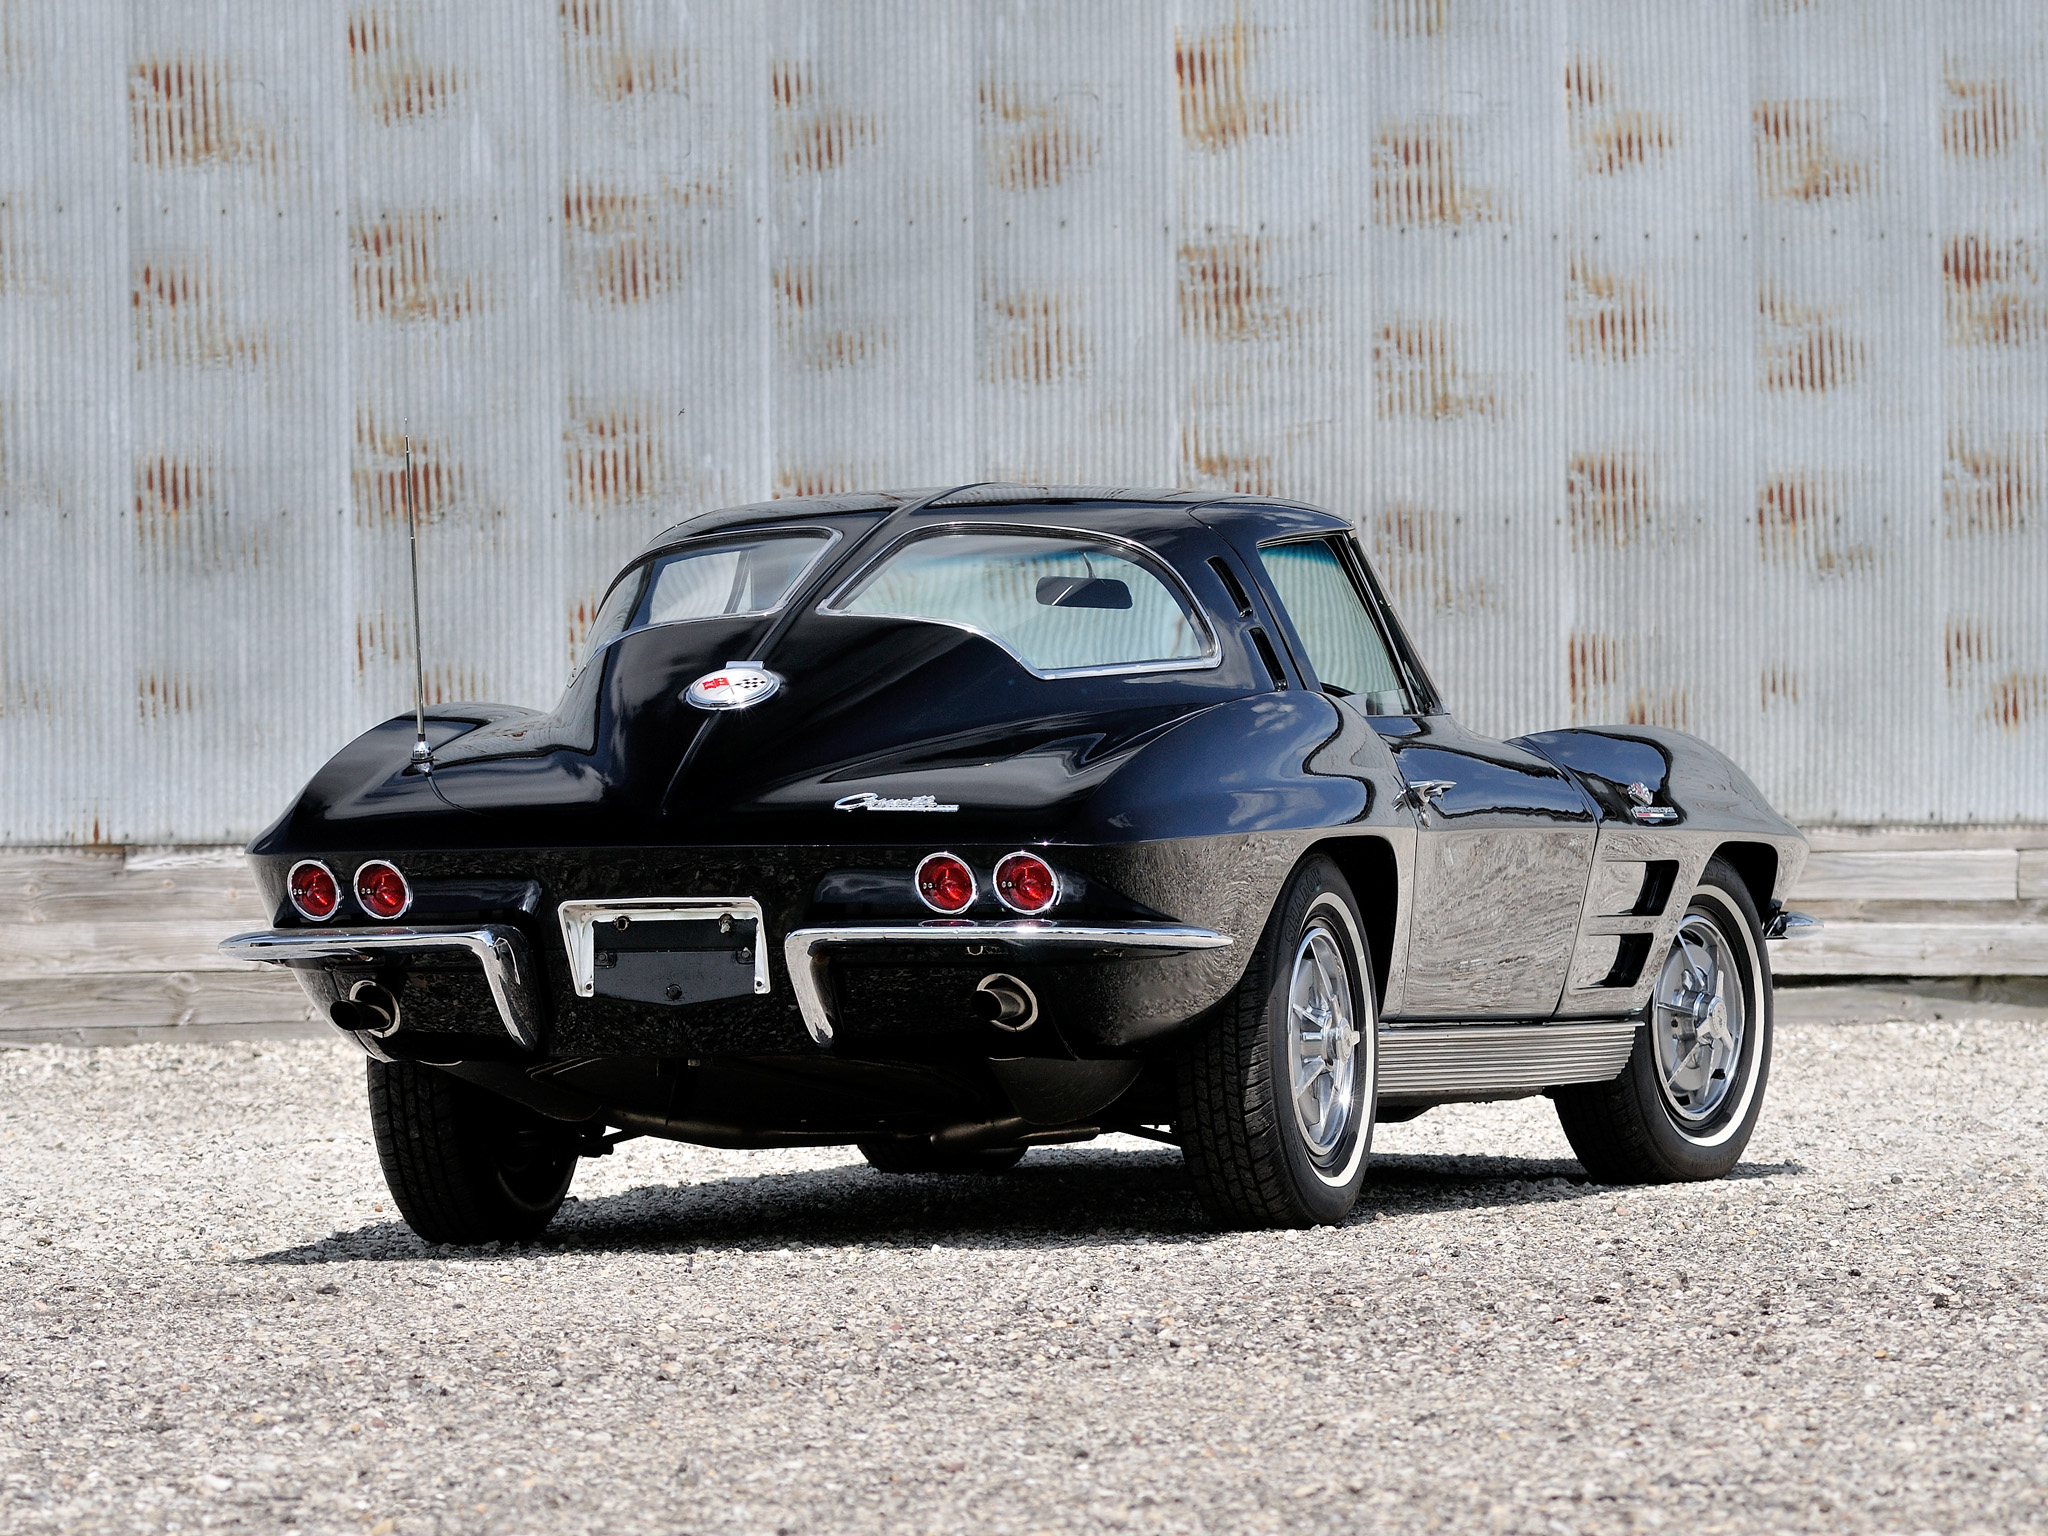 1963, Chevrolet, Corvette, Sting, Ray, L84, 327, Fuel, Injection, C 2, Supercar, Muscle, Classic Wallpaper